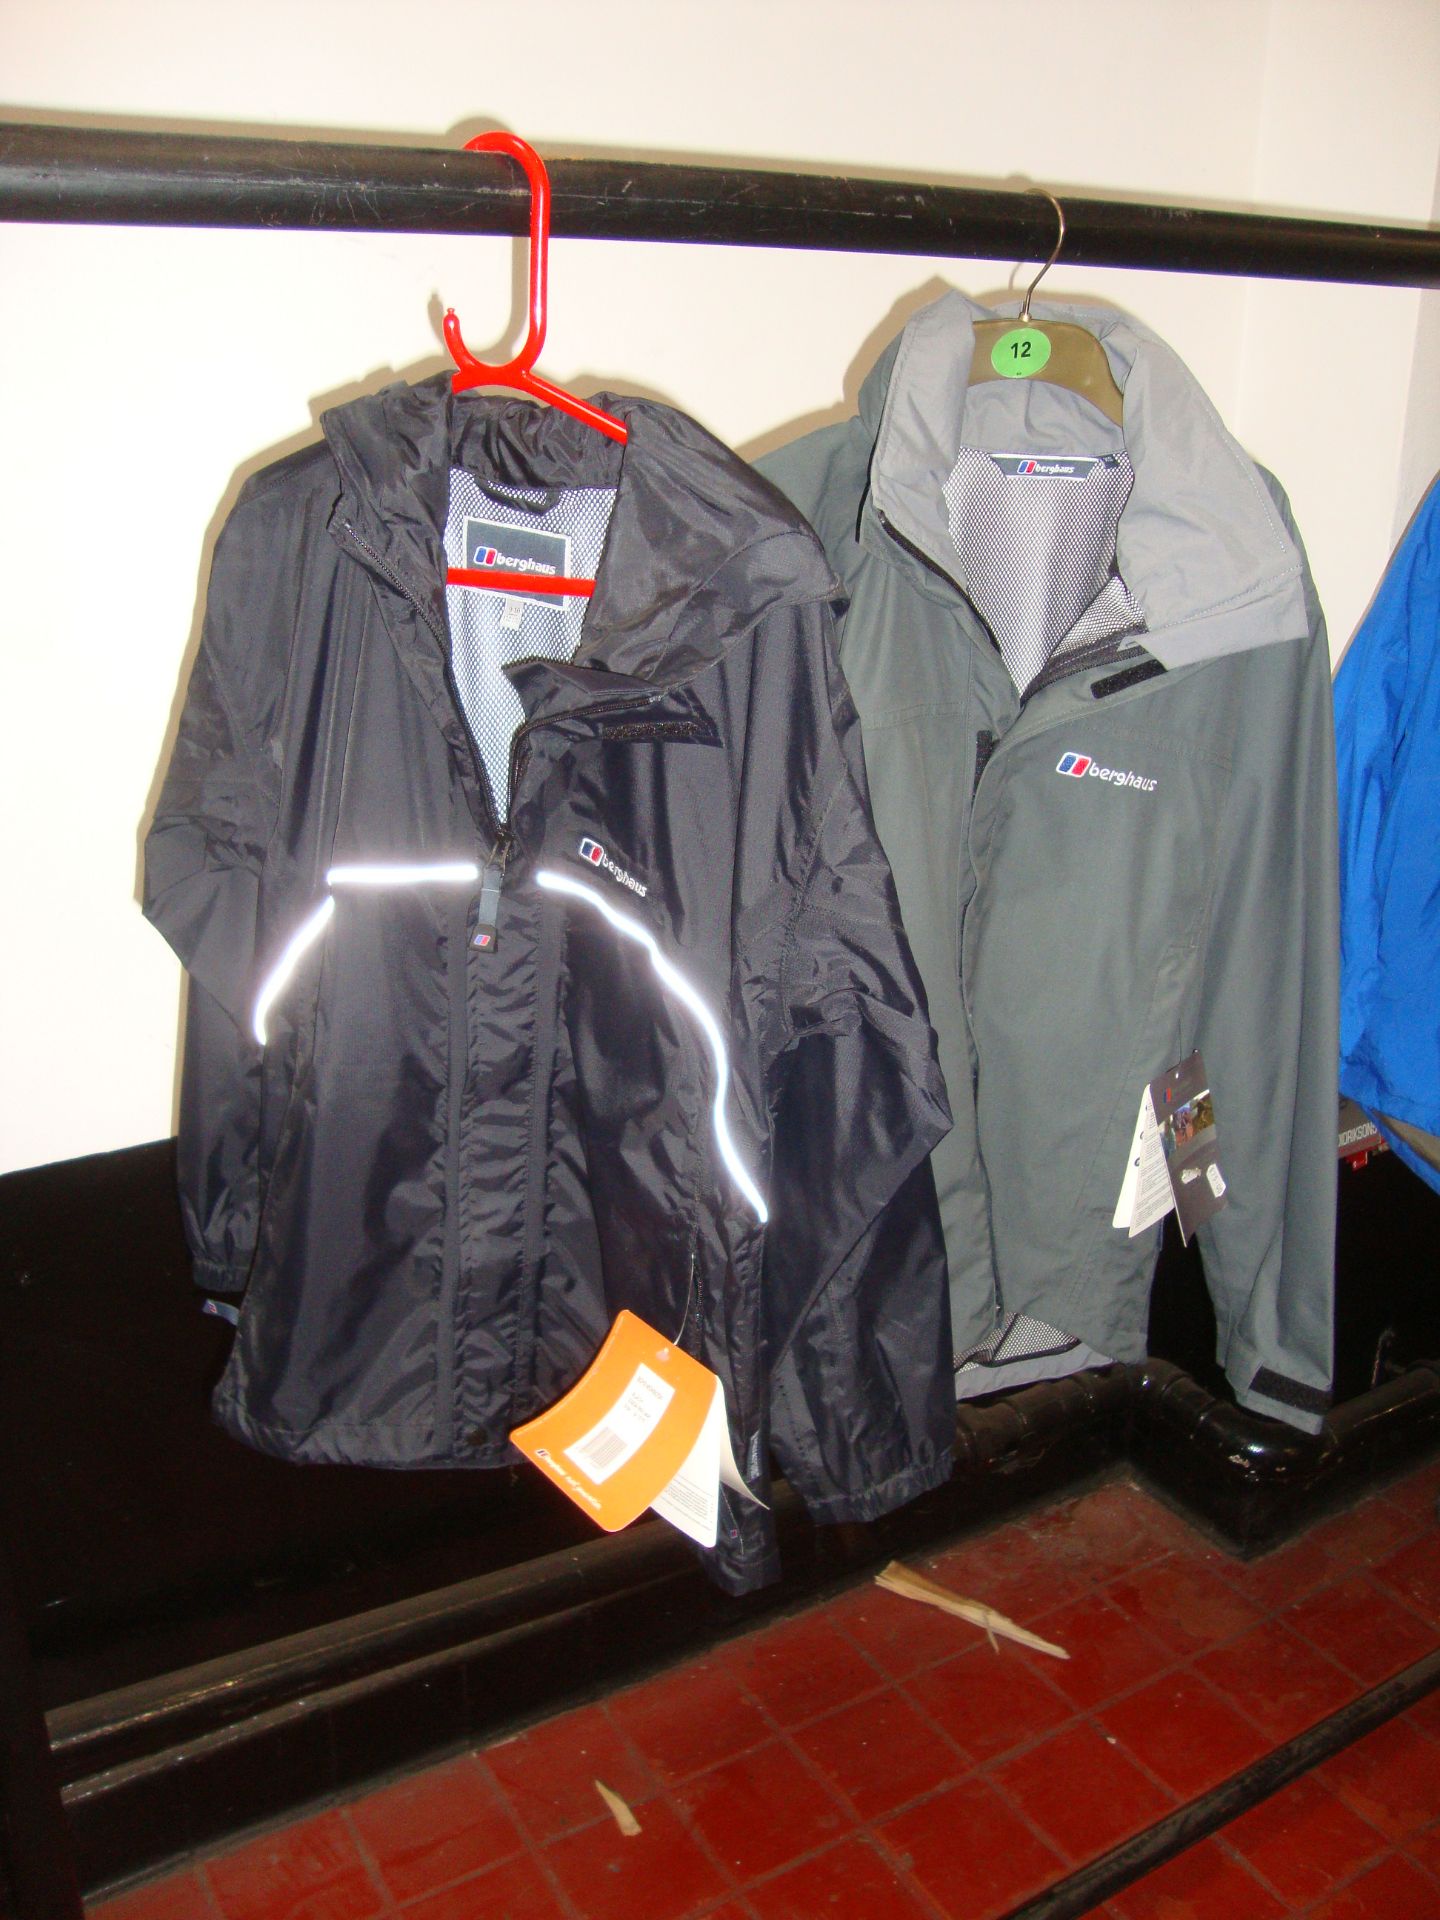 2 off Berghaus assorted rainproof jackets - size XS and aged 10, so deeemd childrens for VAT